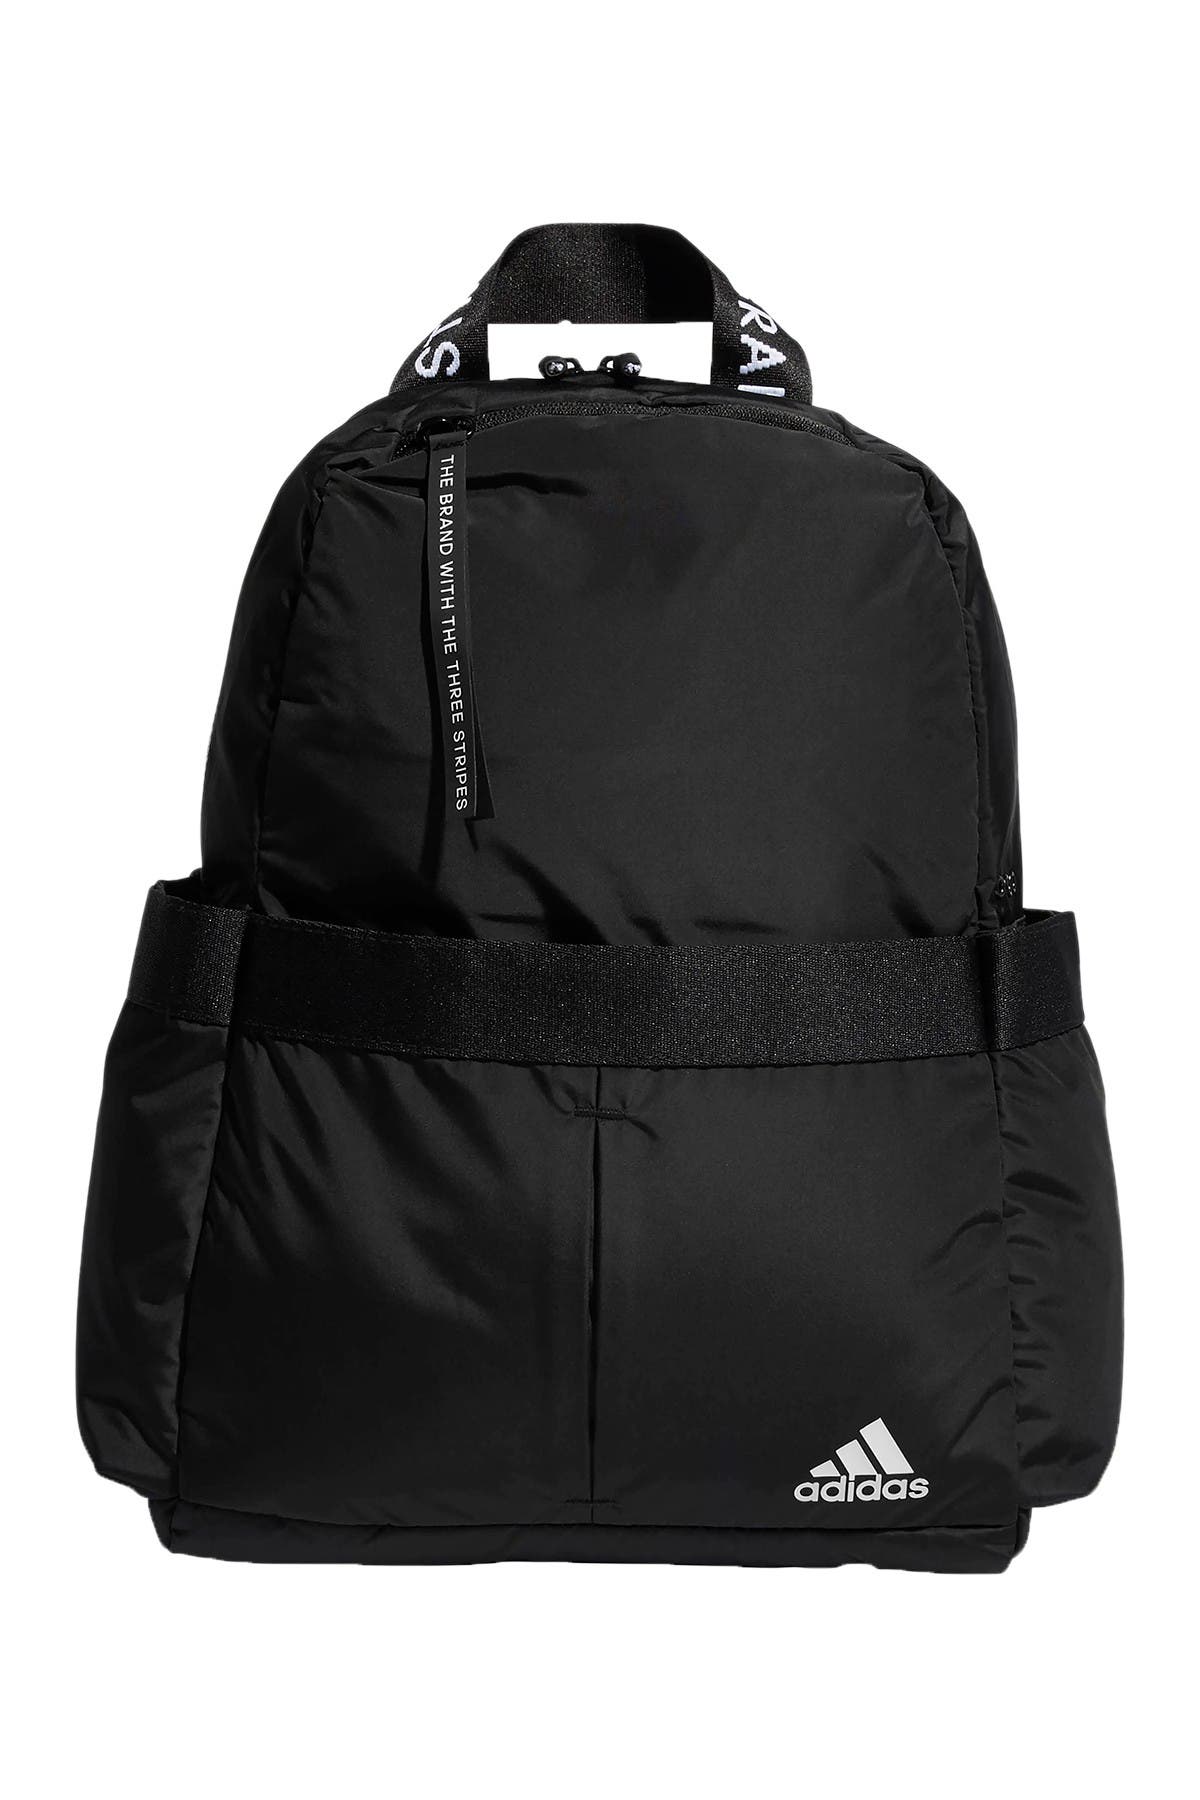 adidas vfa backpack review